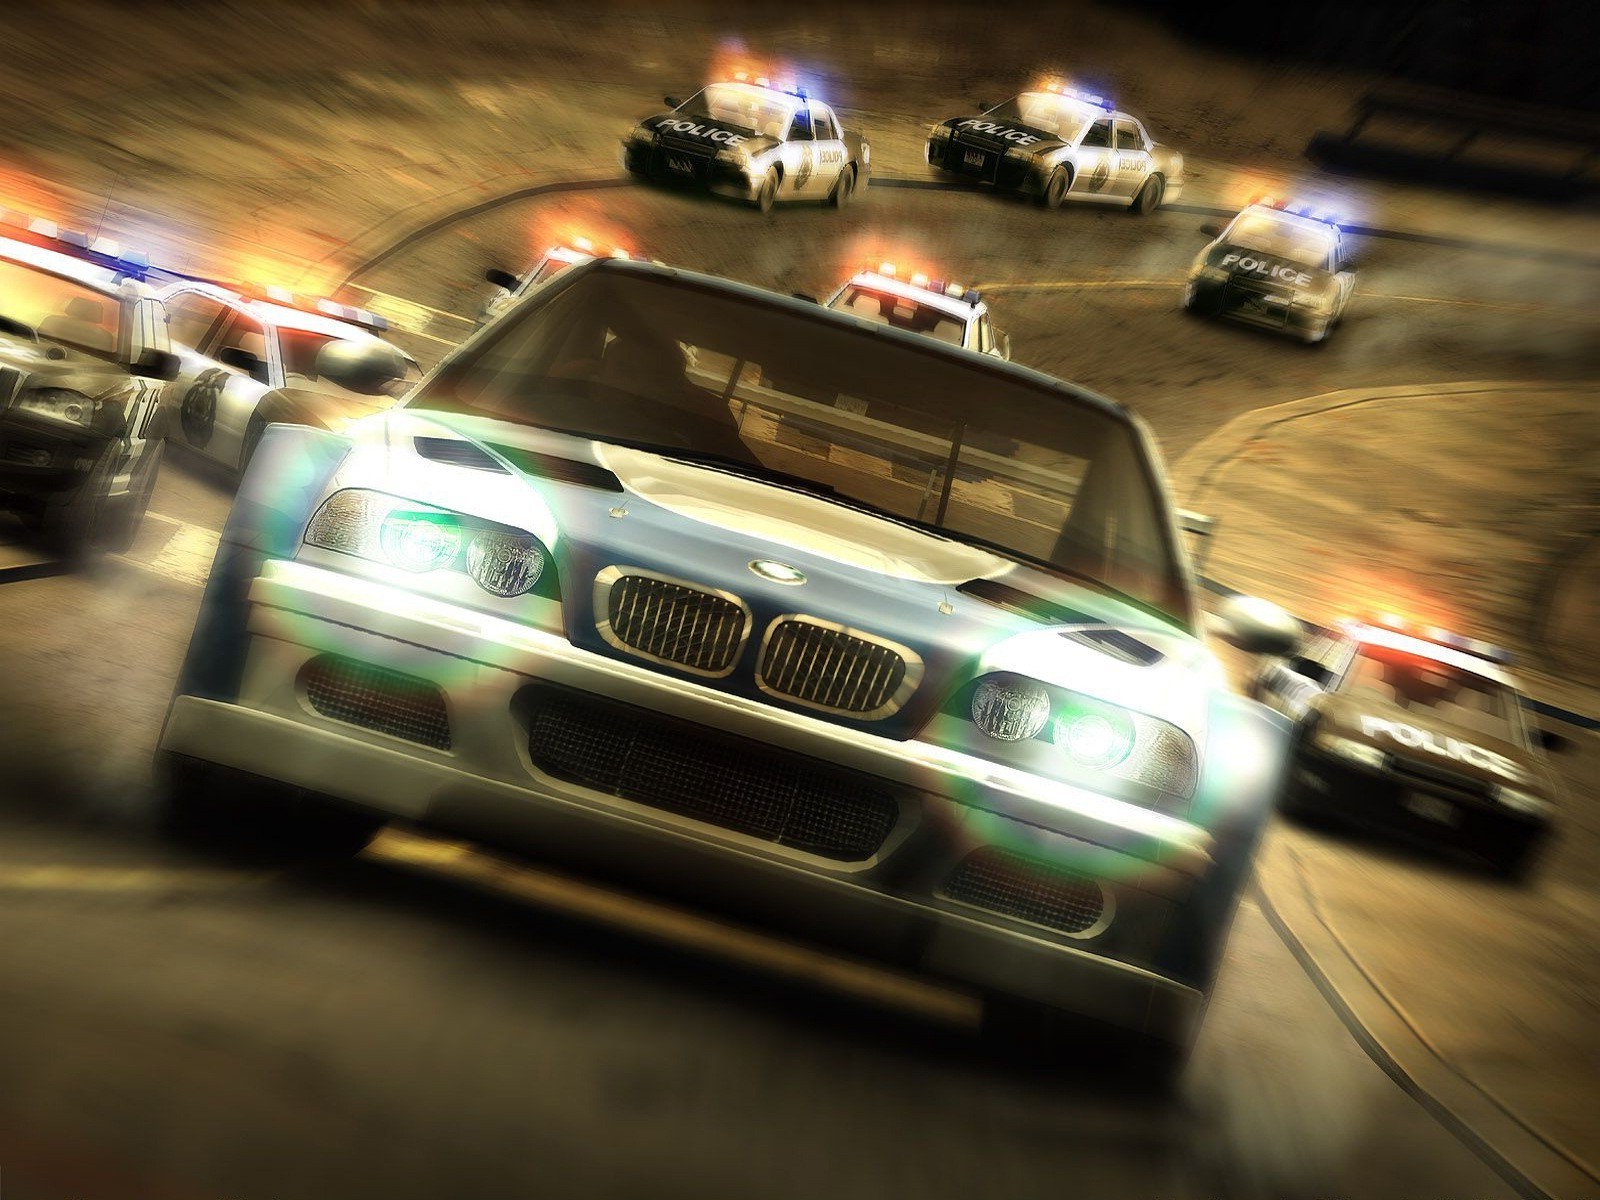 16+ Need For Speed Most Wanted Wallpaper Hd Bmw free download